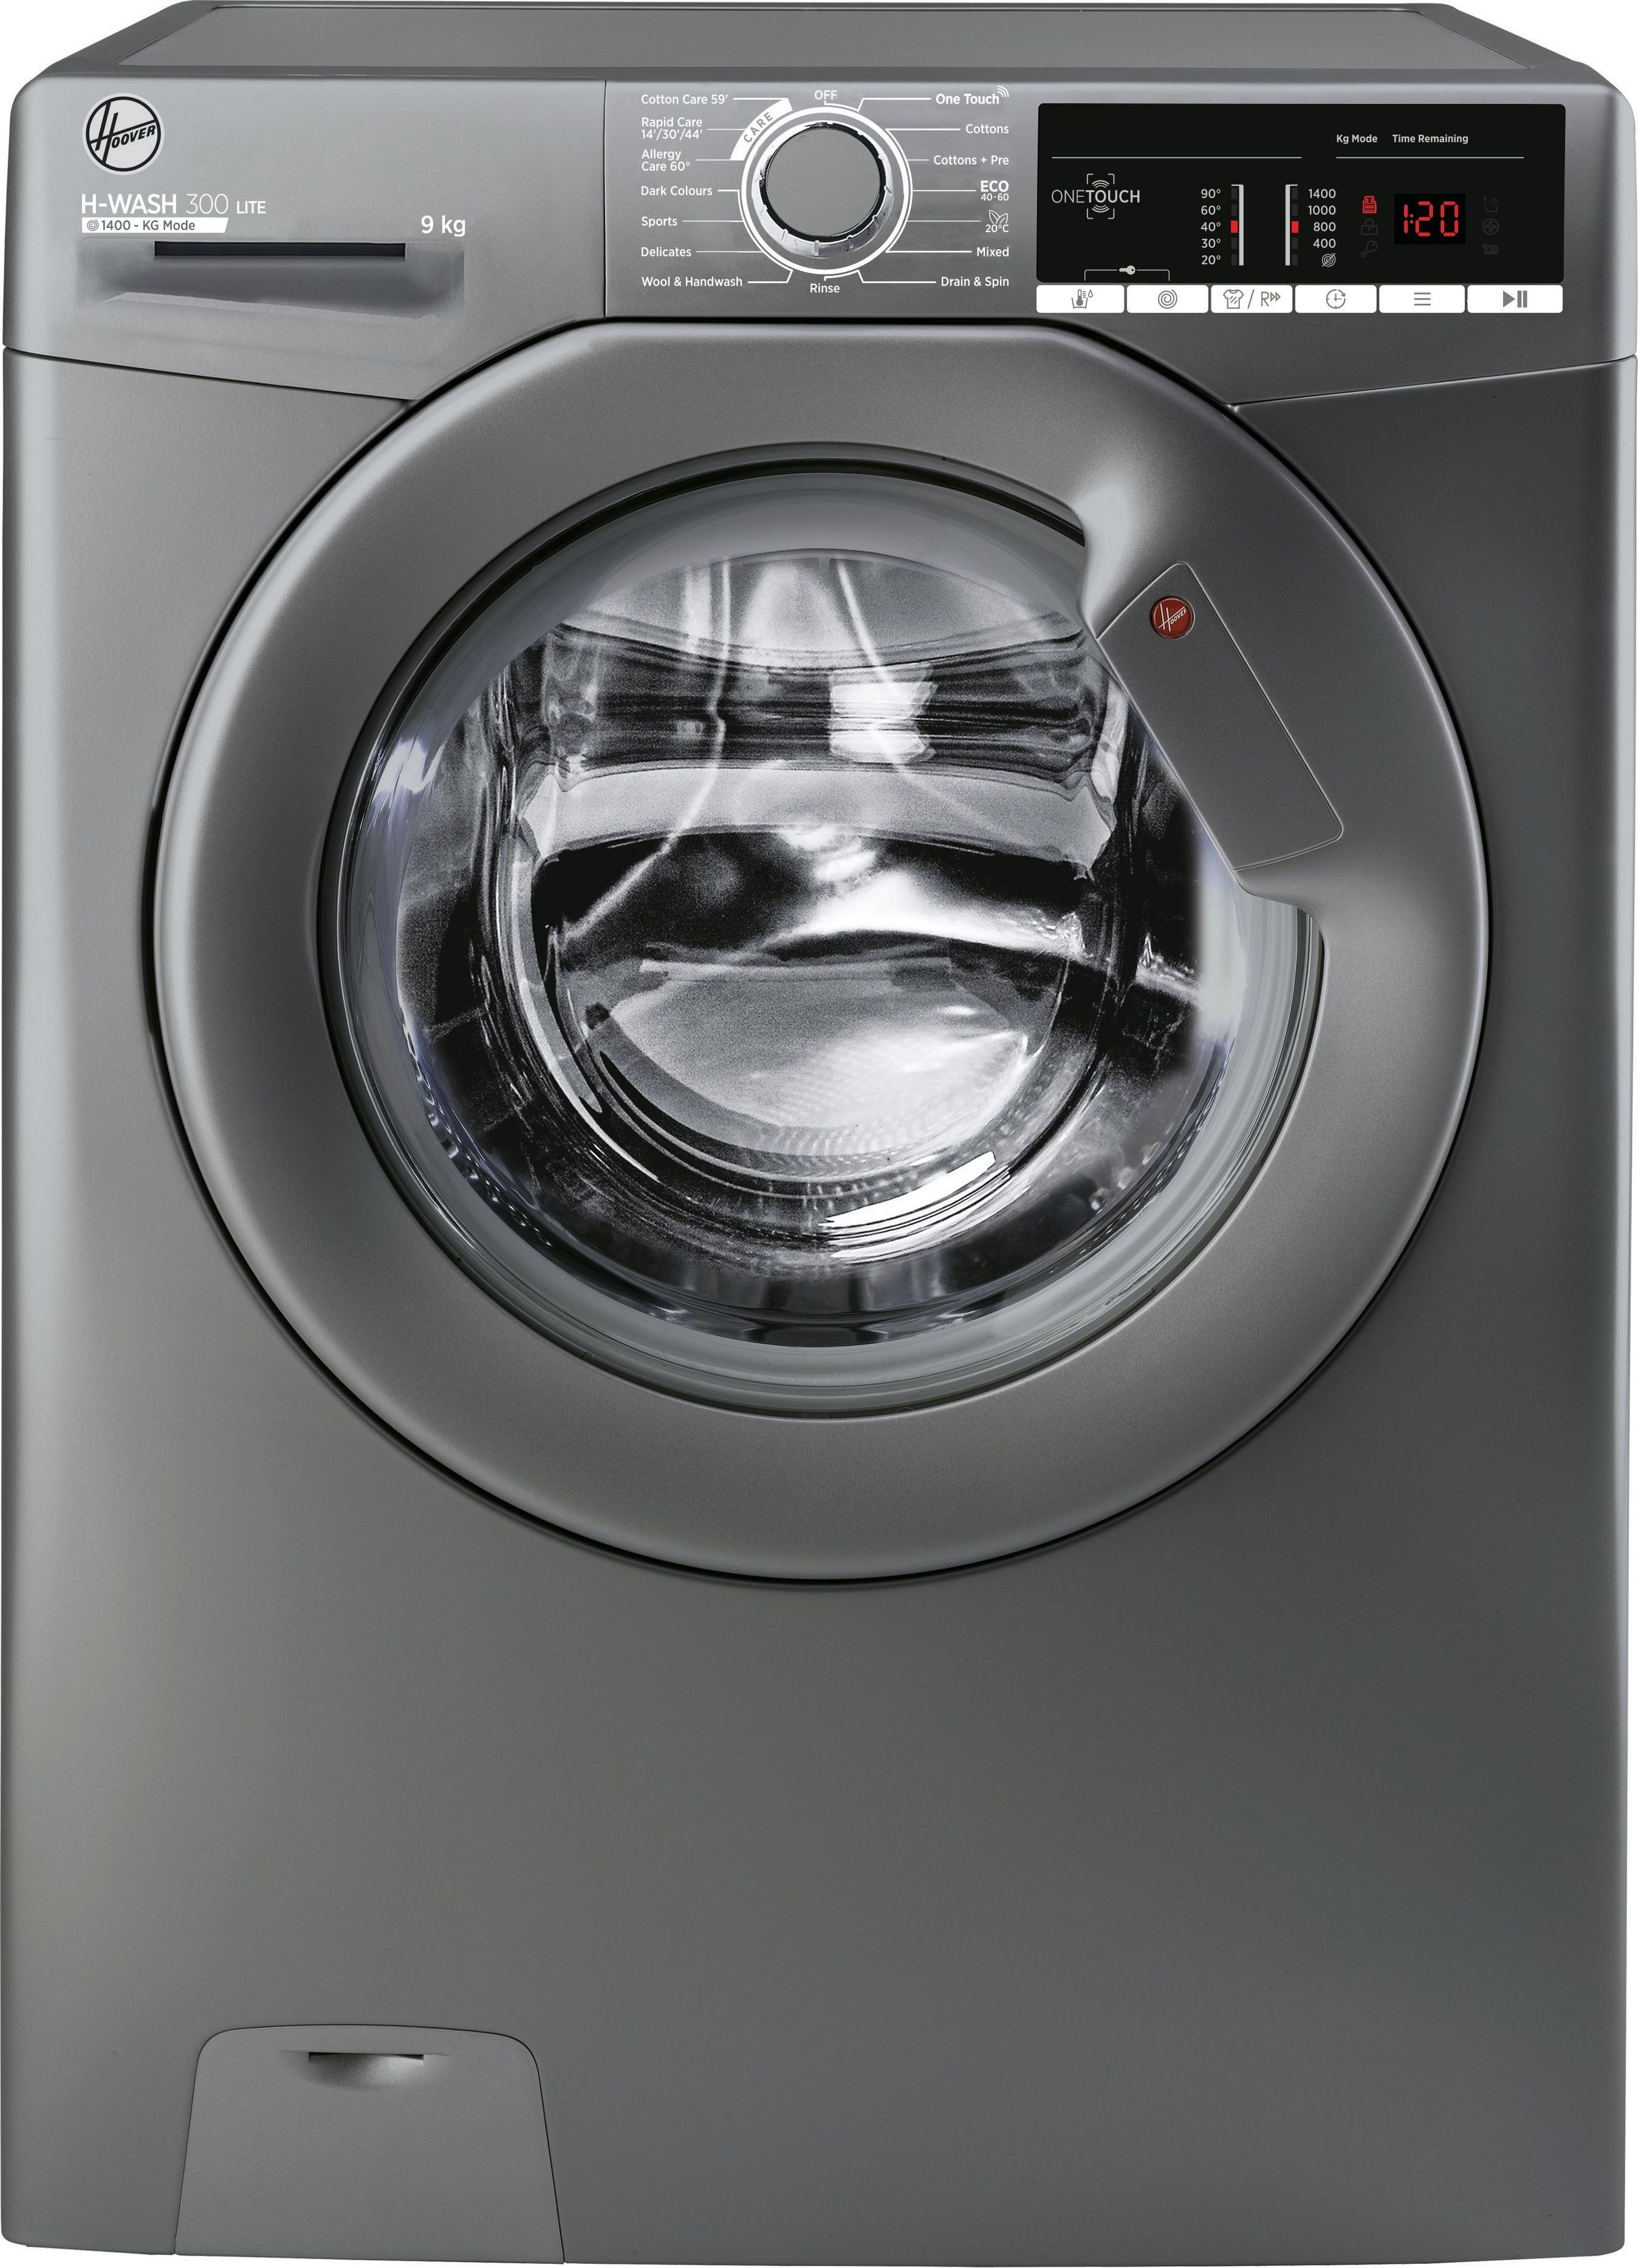 Hoover H-WASH 300 LITE H3W49TAGG4/1-80 9kg Washing Machine with 1400 rpm - Graphite - B Rated, Silver